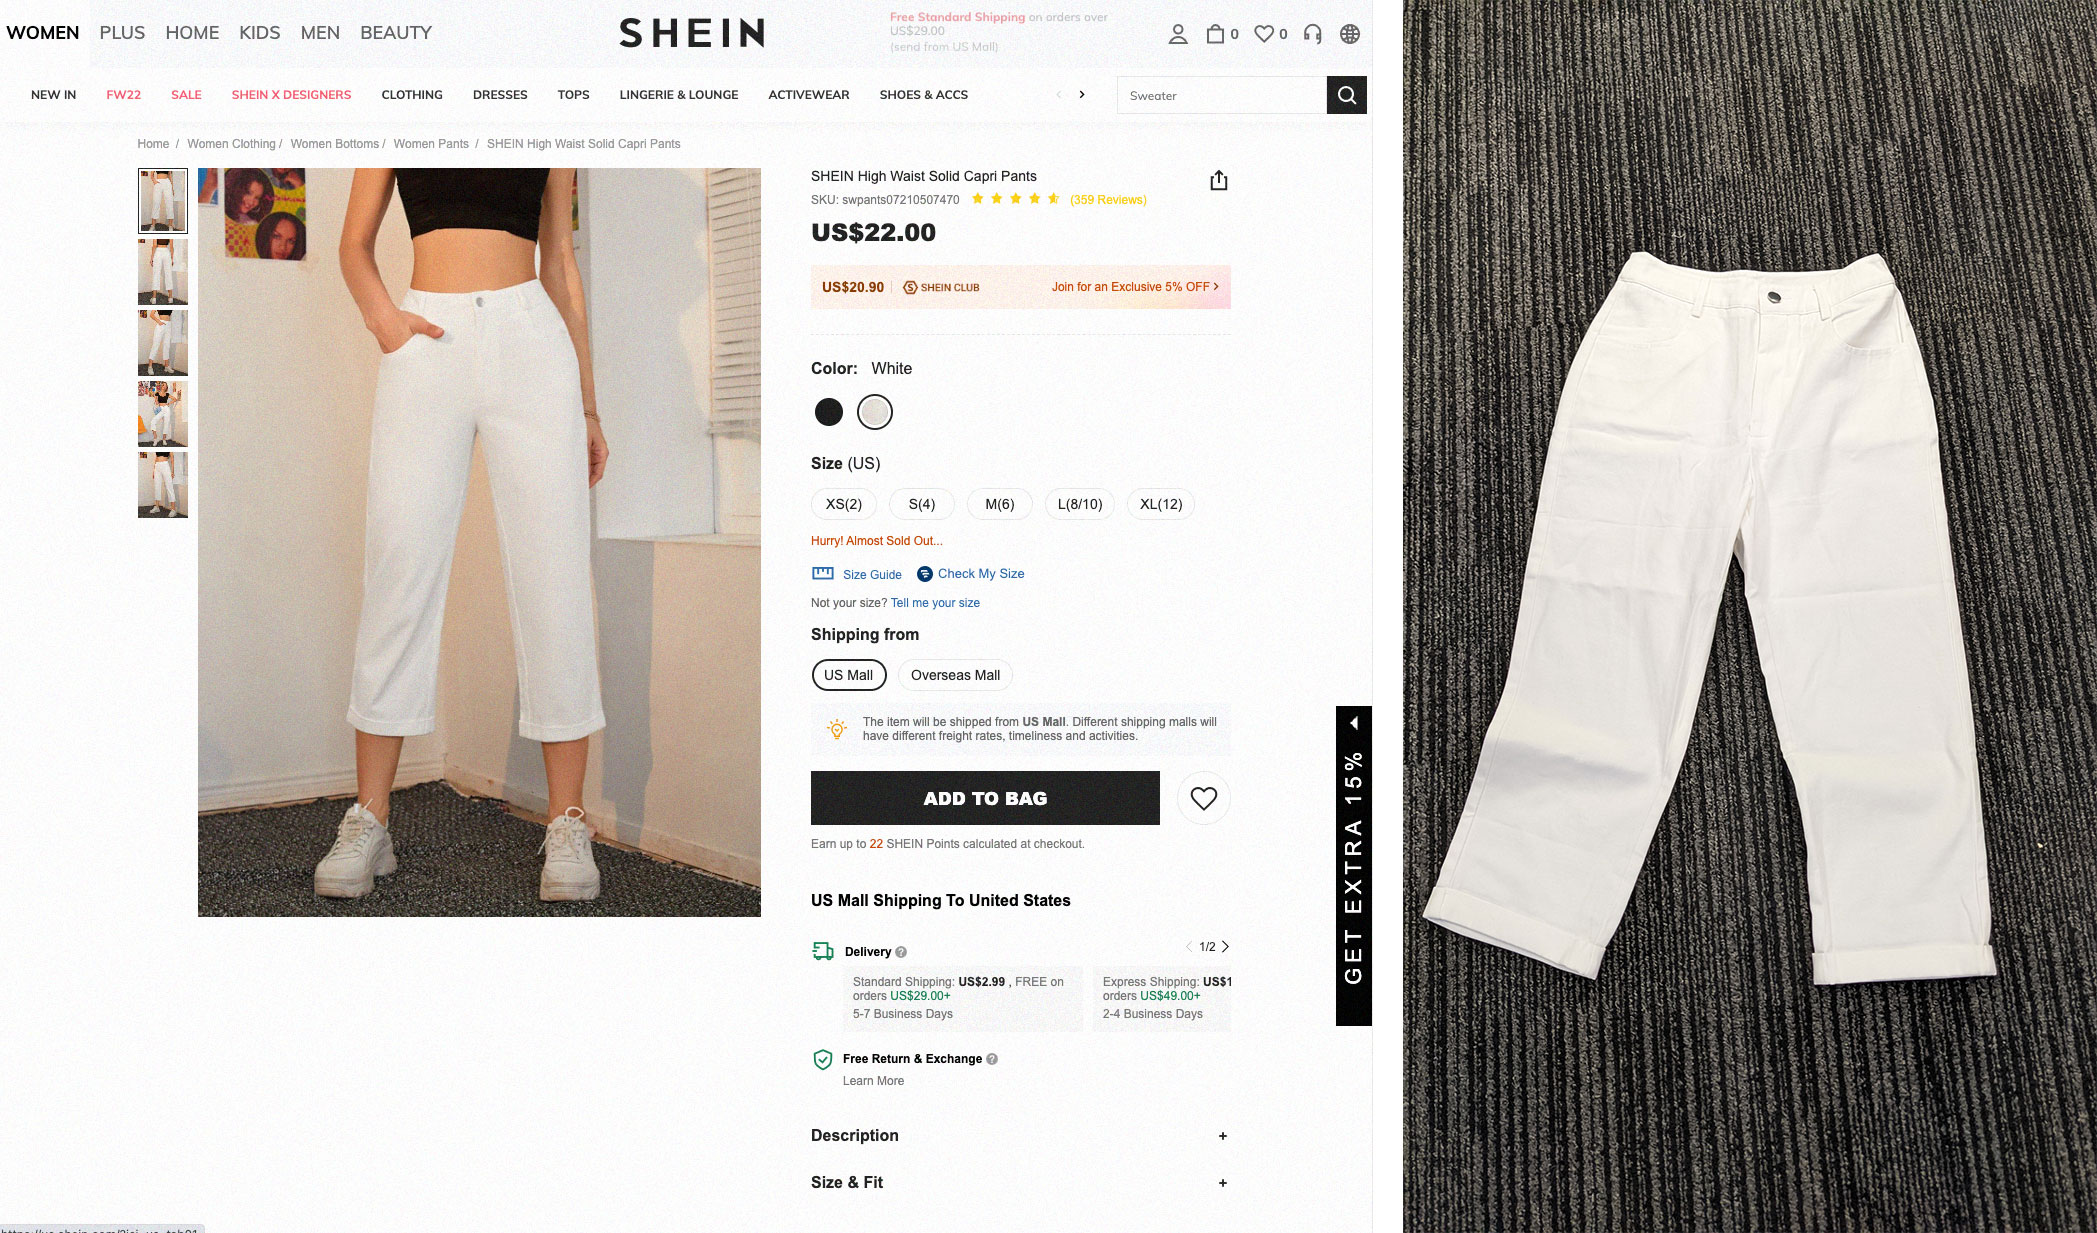 Big Blow For Shein, Club Factory As India Bars Import Of Goods As Gifts